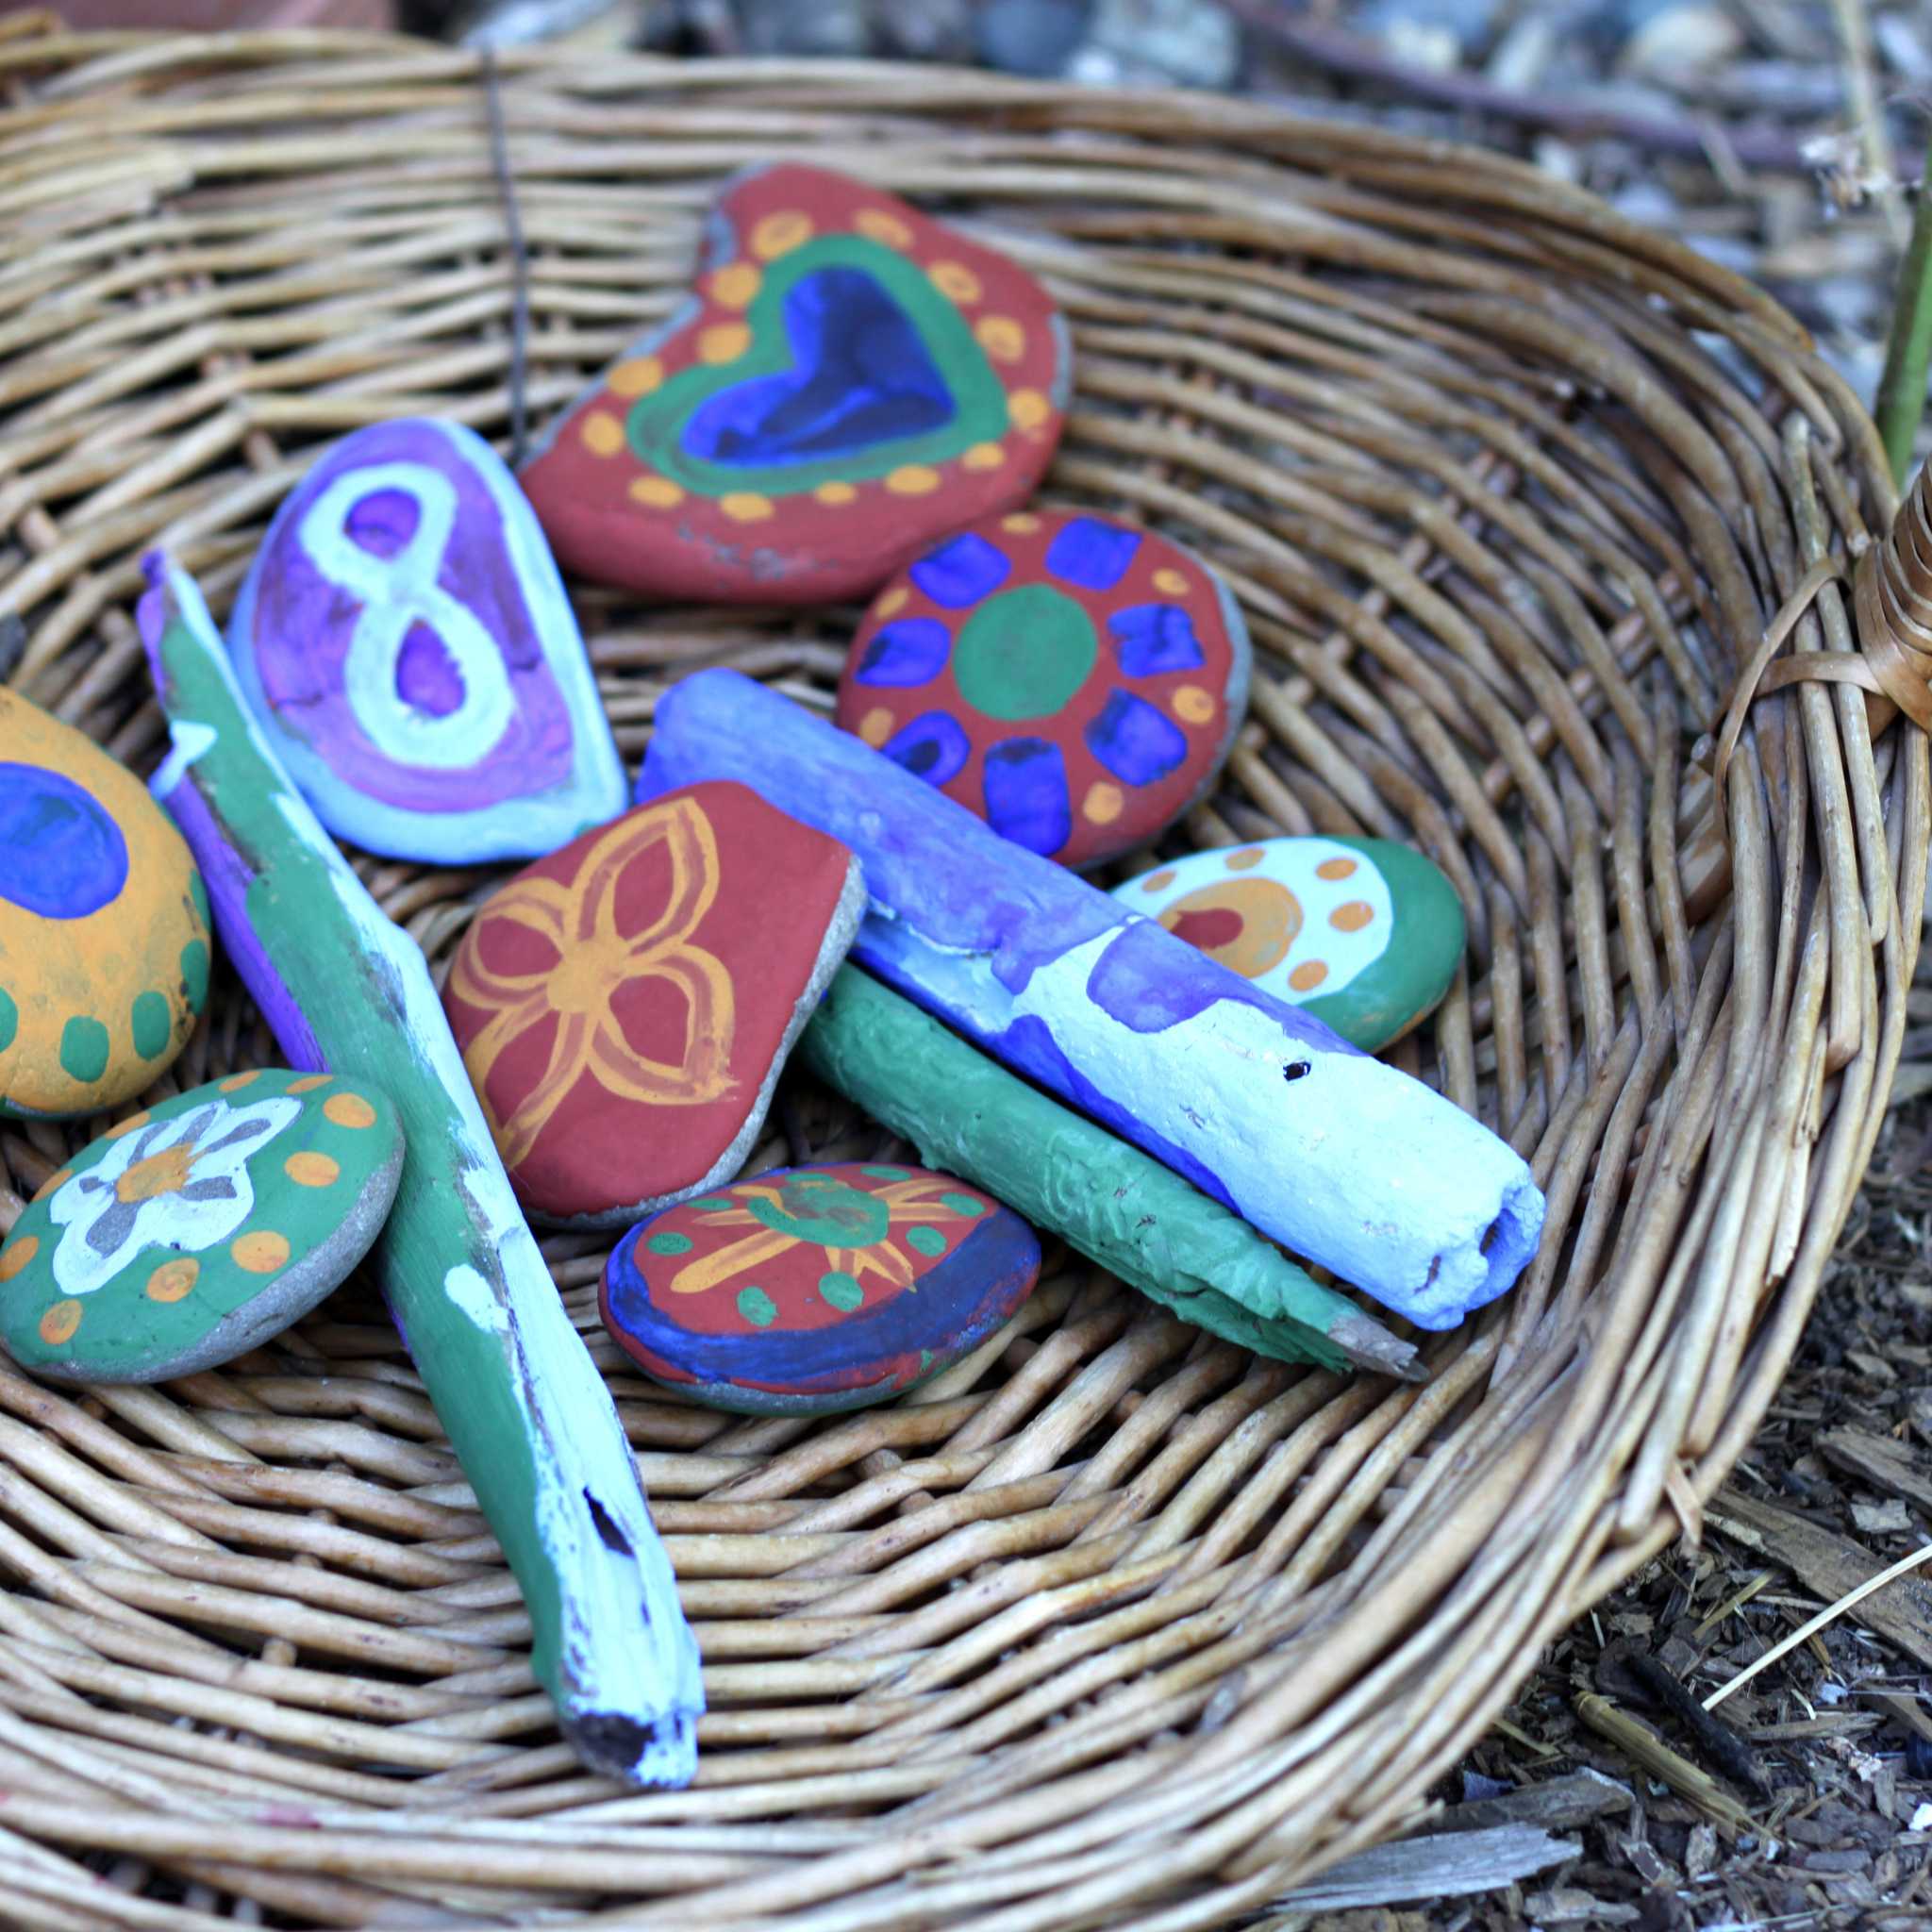 Natural Earth Paint Kit Experience - Painted On Rocks And Sticks In Basket